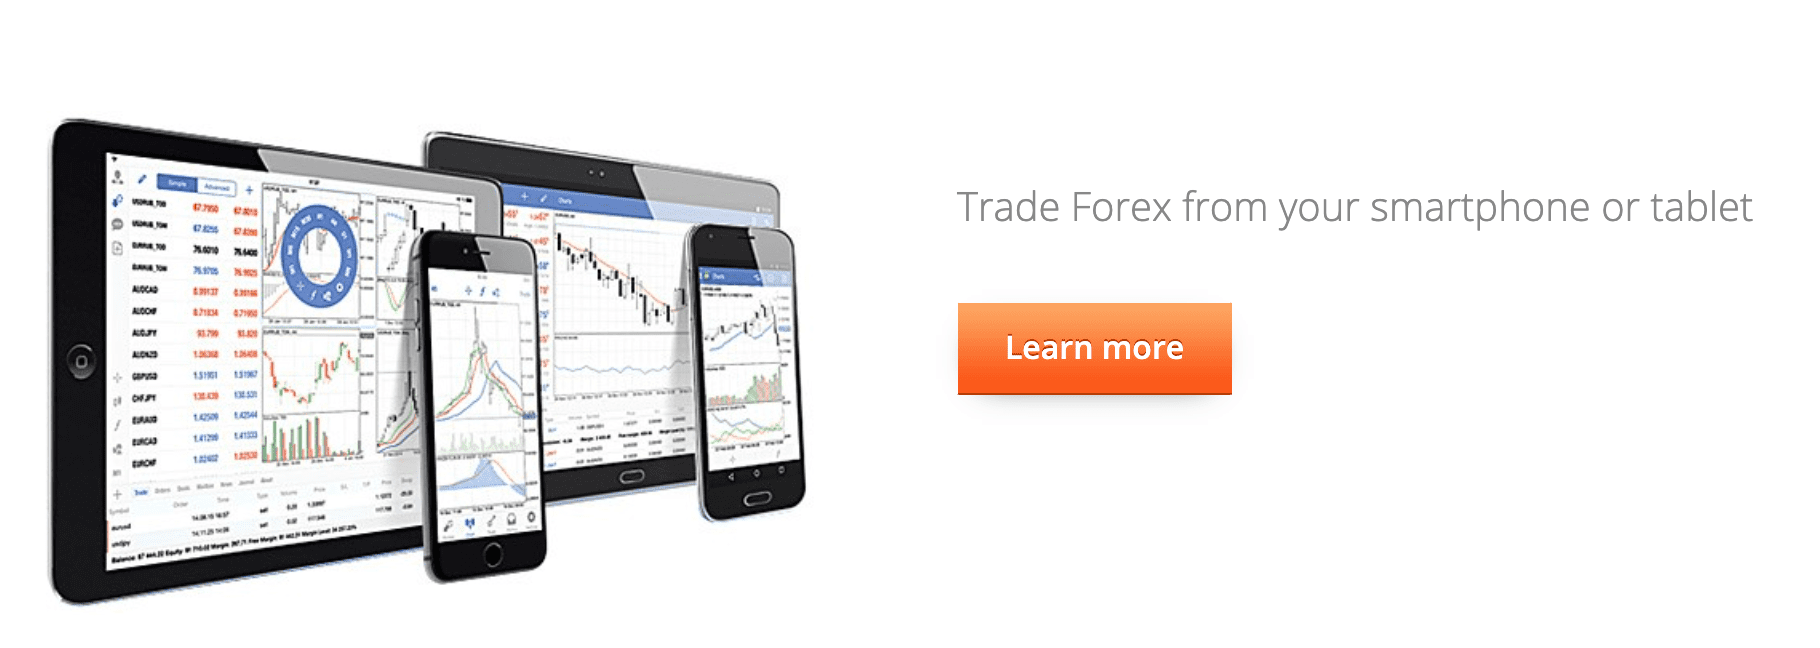 mt4 forex trading